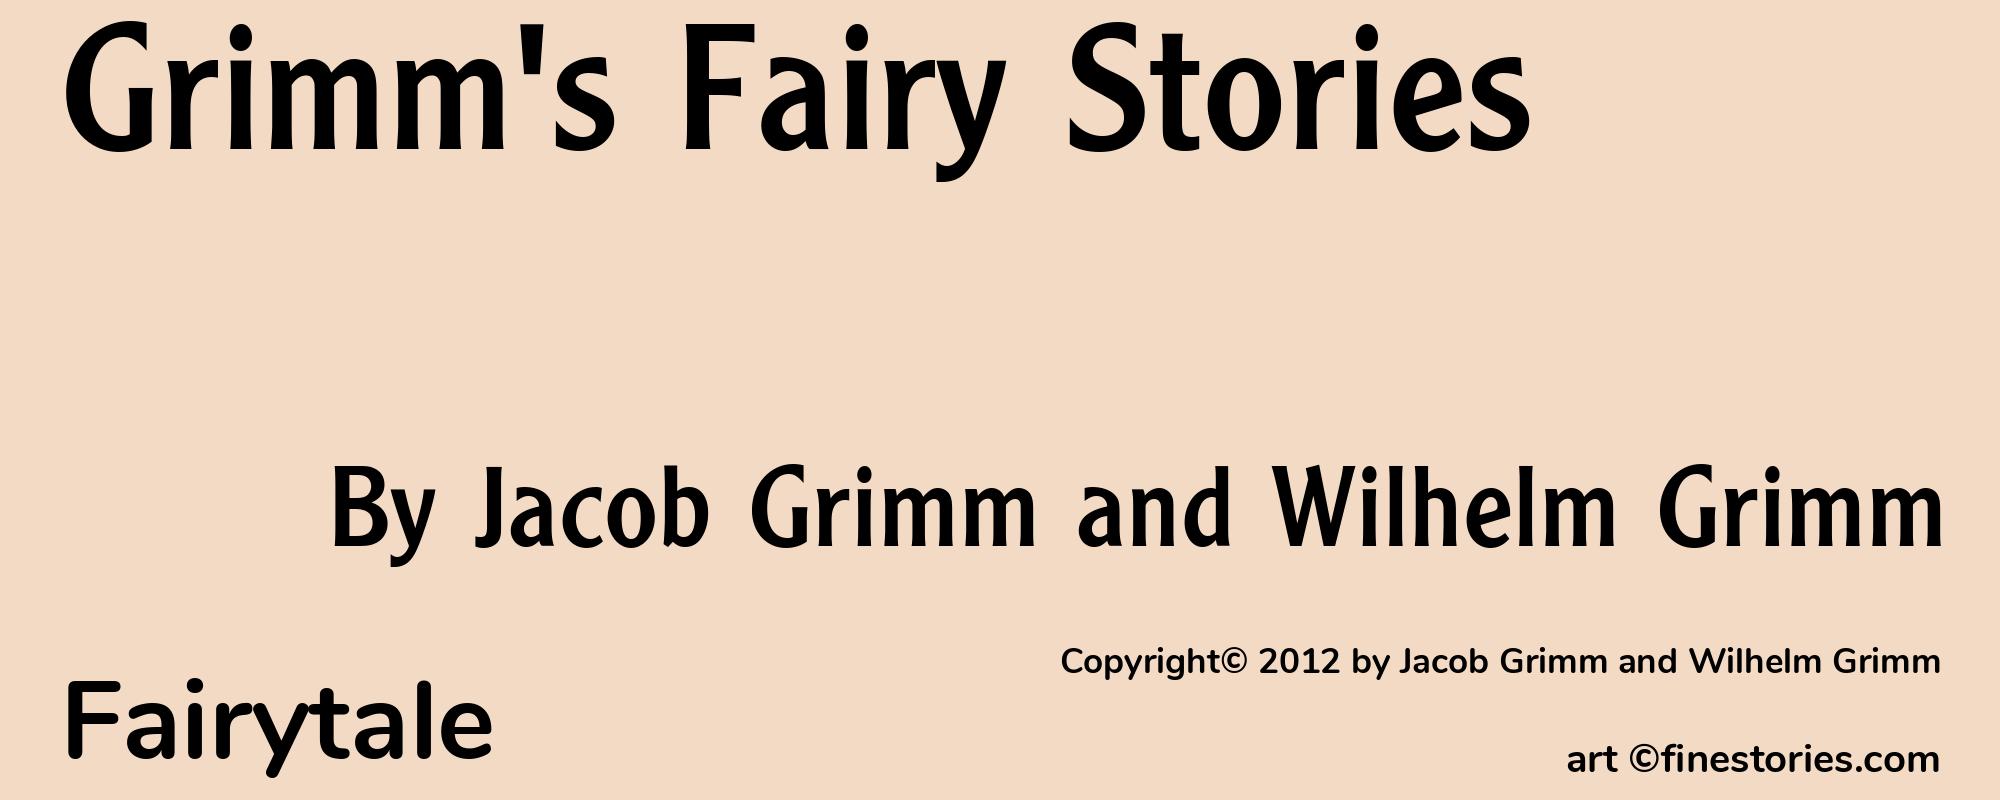 Grimm's Fairy Stories - Cover